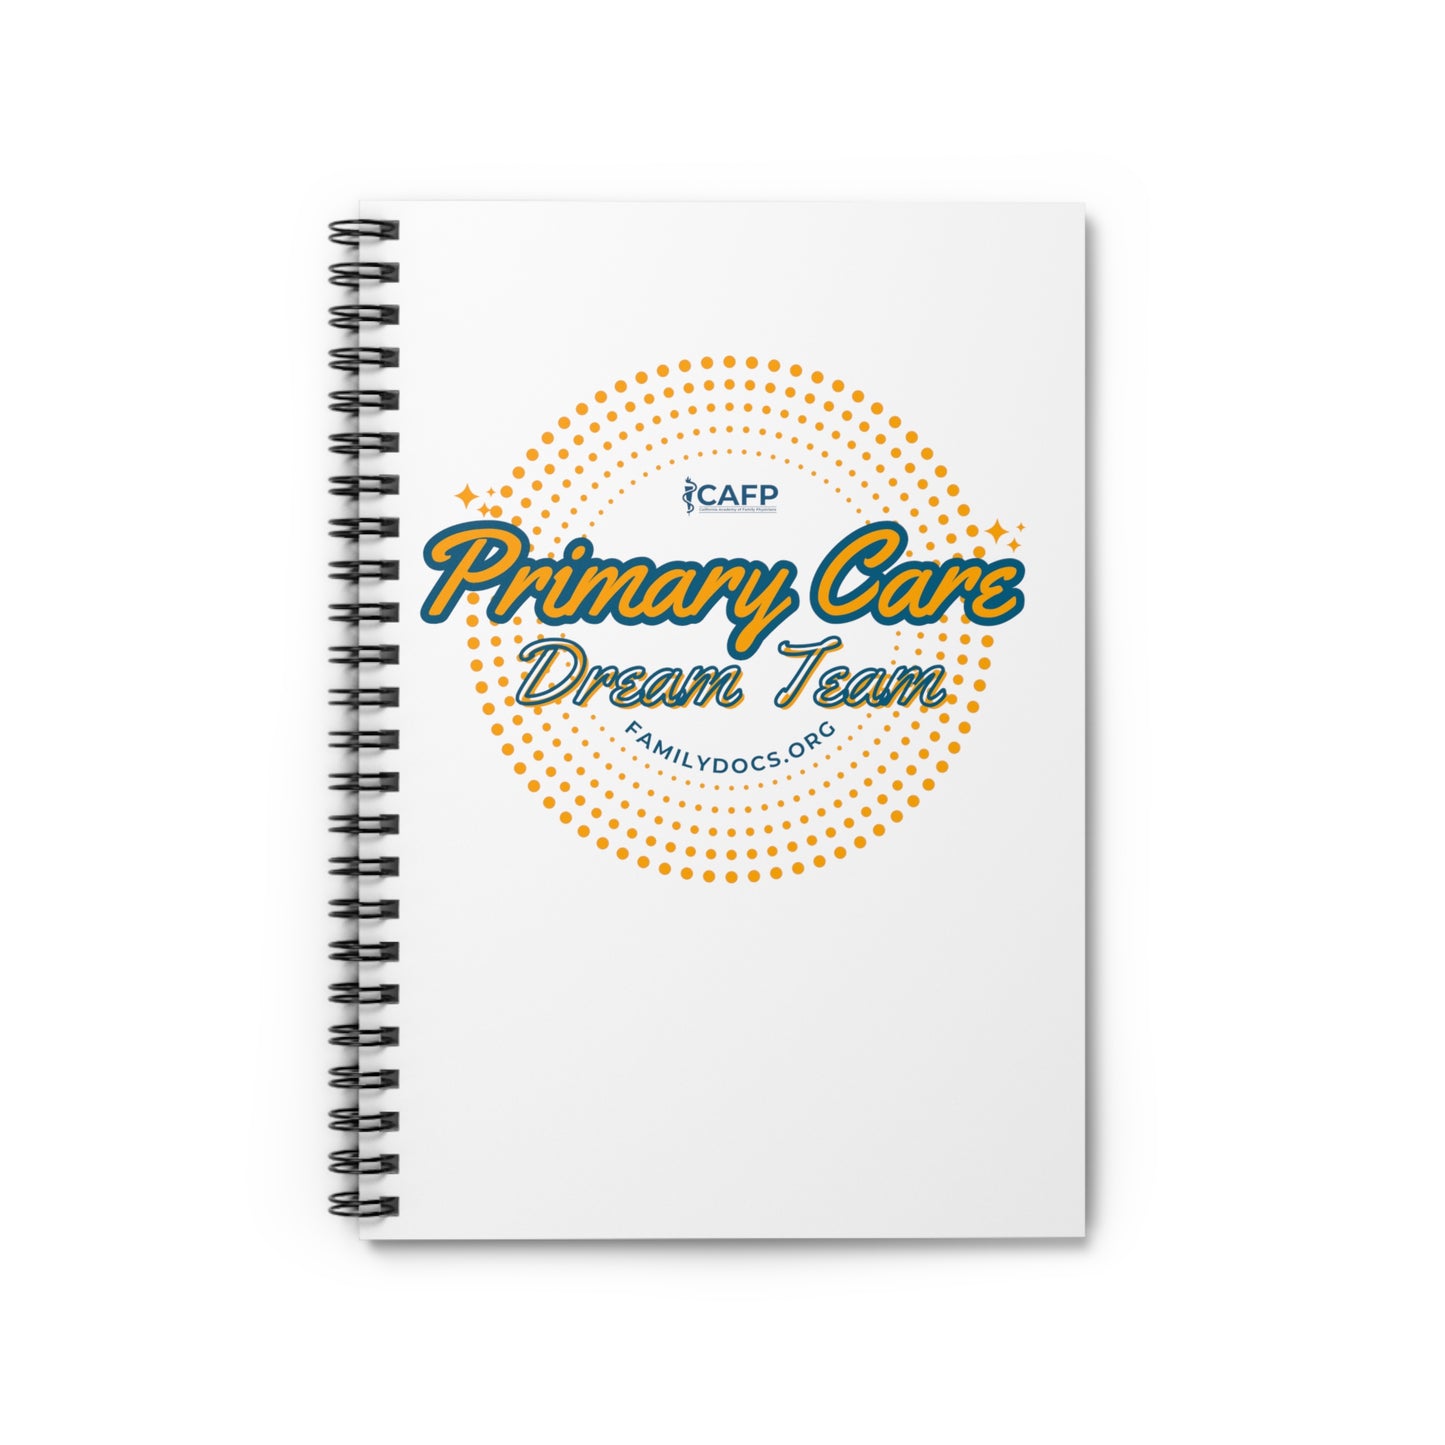 Primary Care Dream Team - Spiral Notebook - Ruled Line